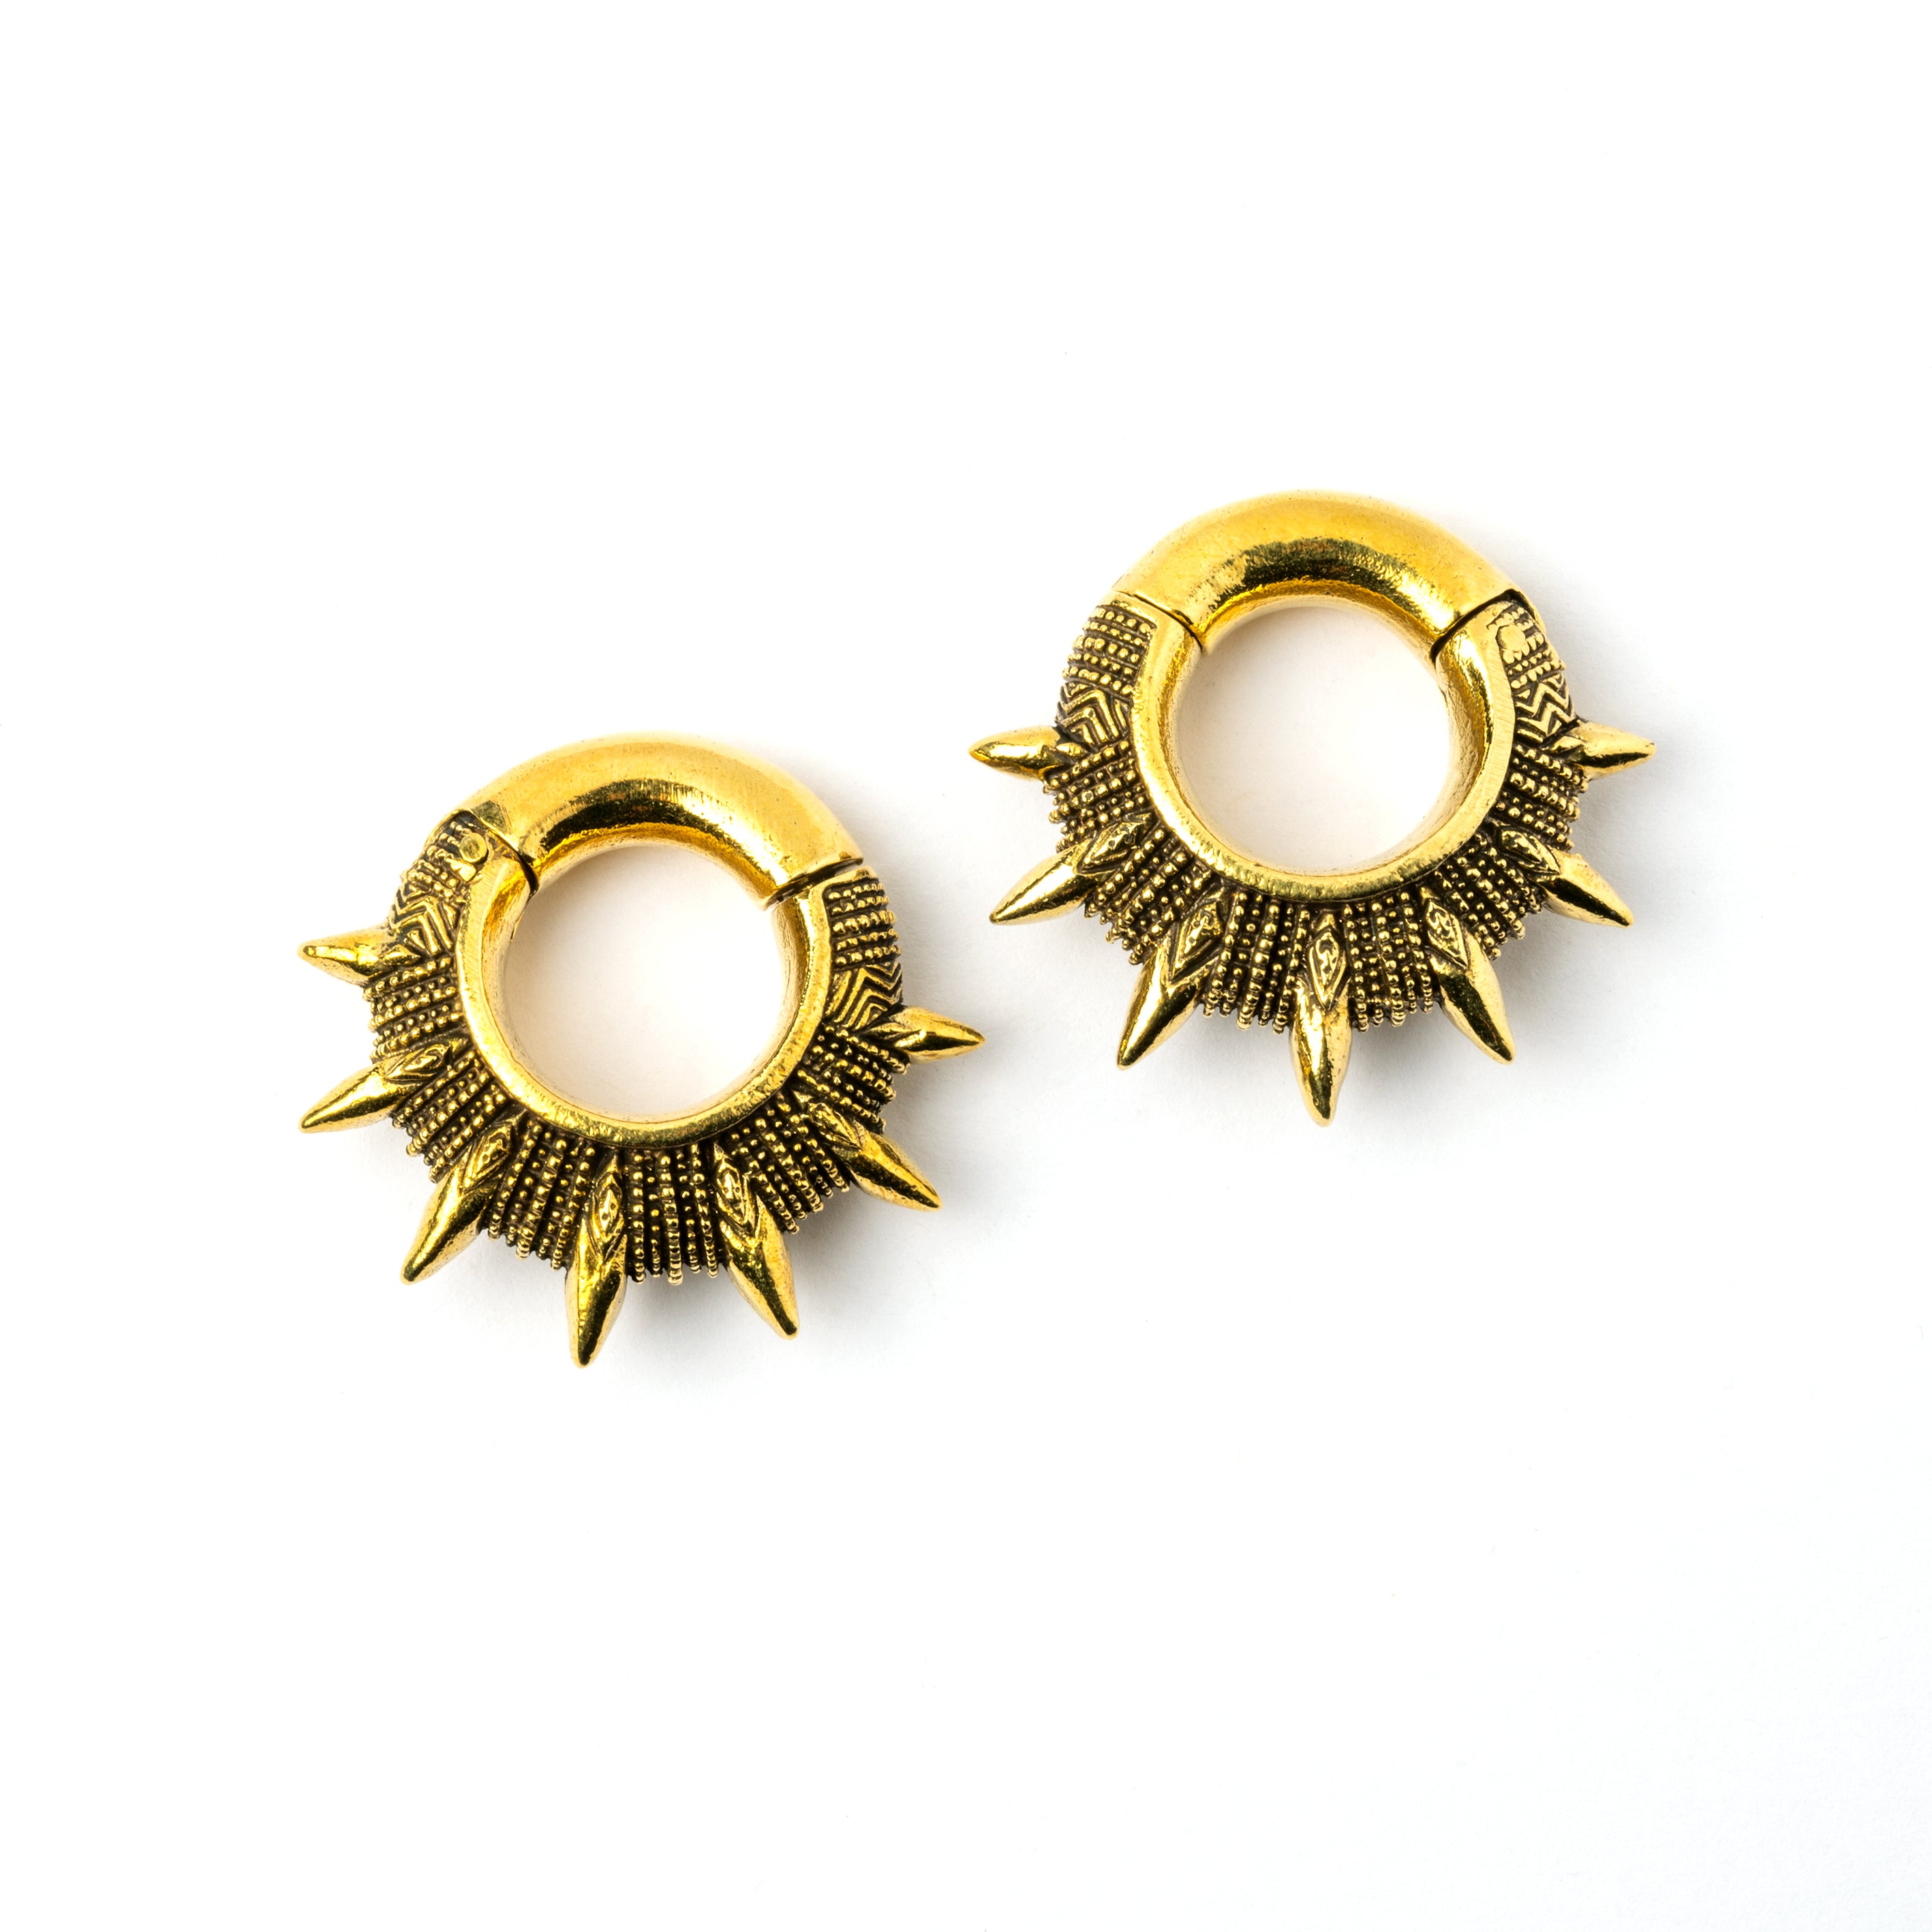 pair of golden spiky ear weights hoops frontal view